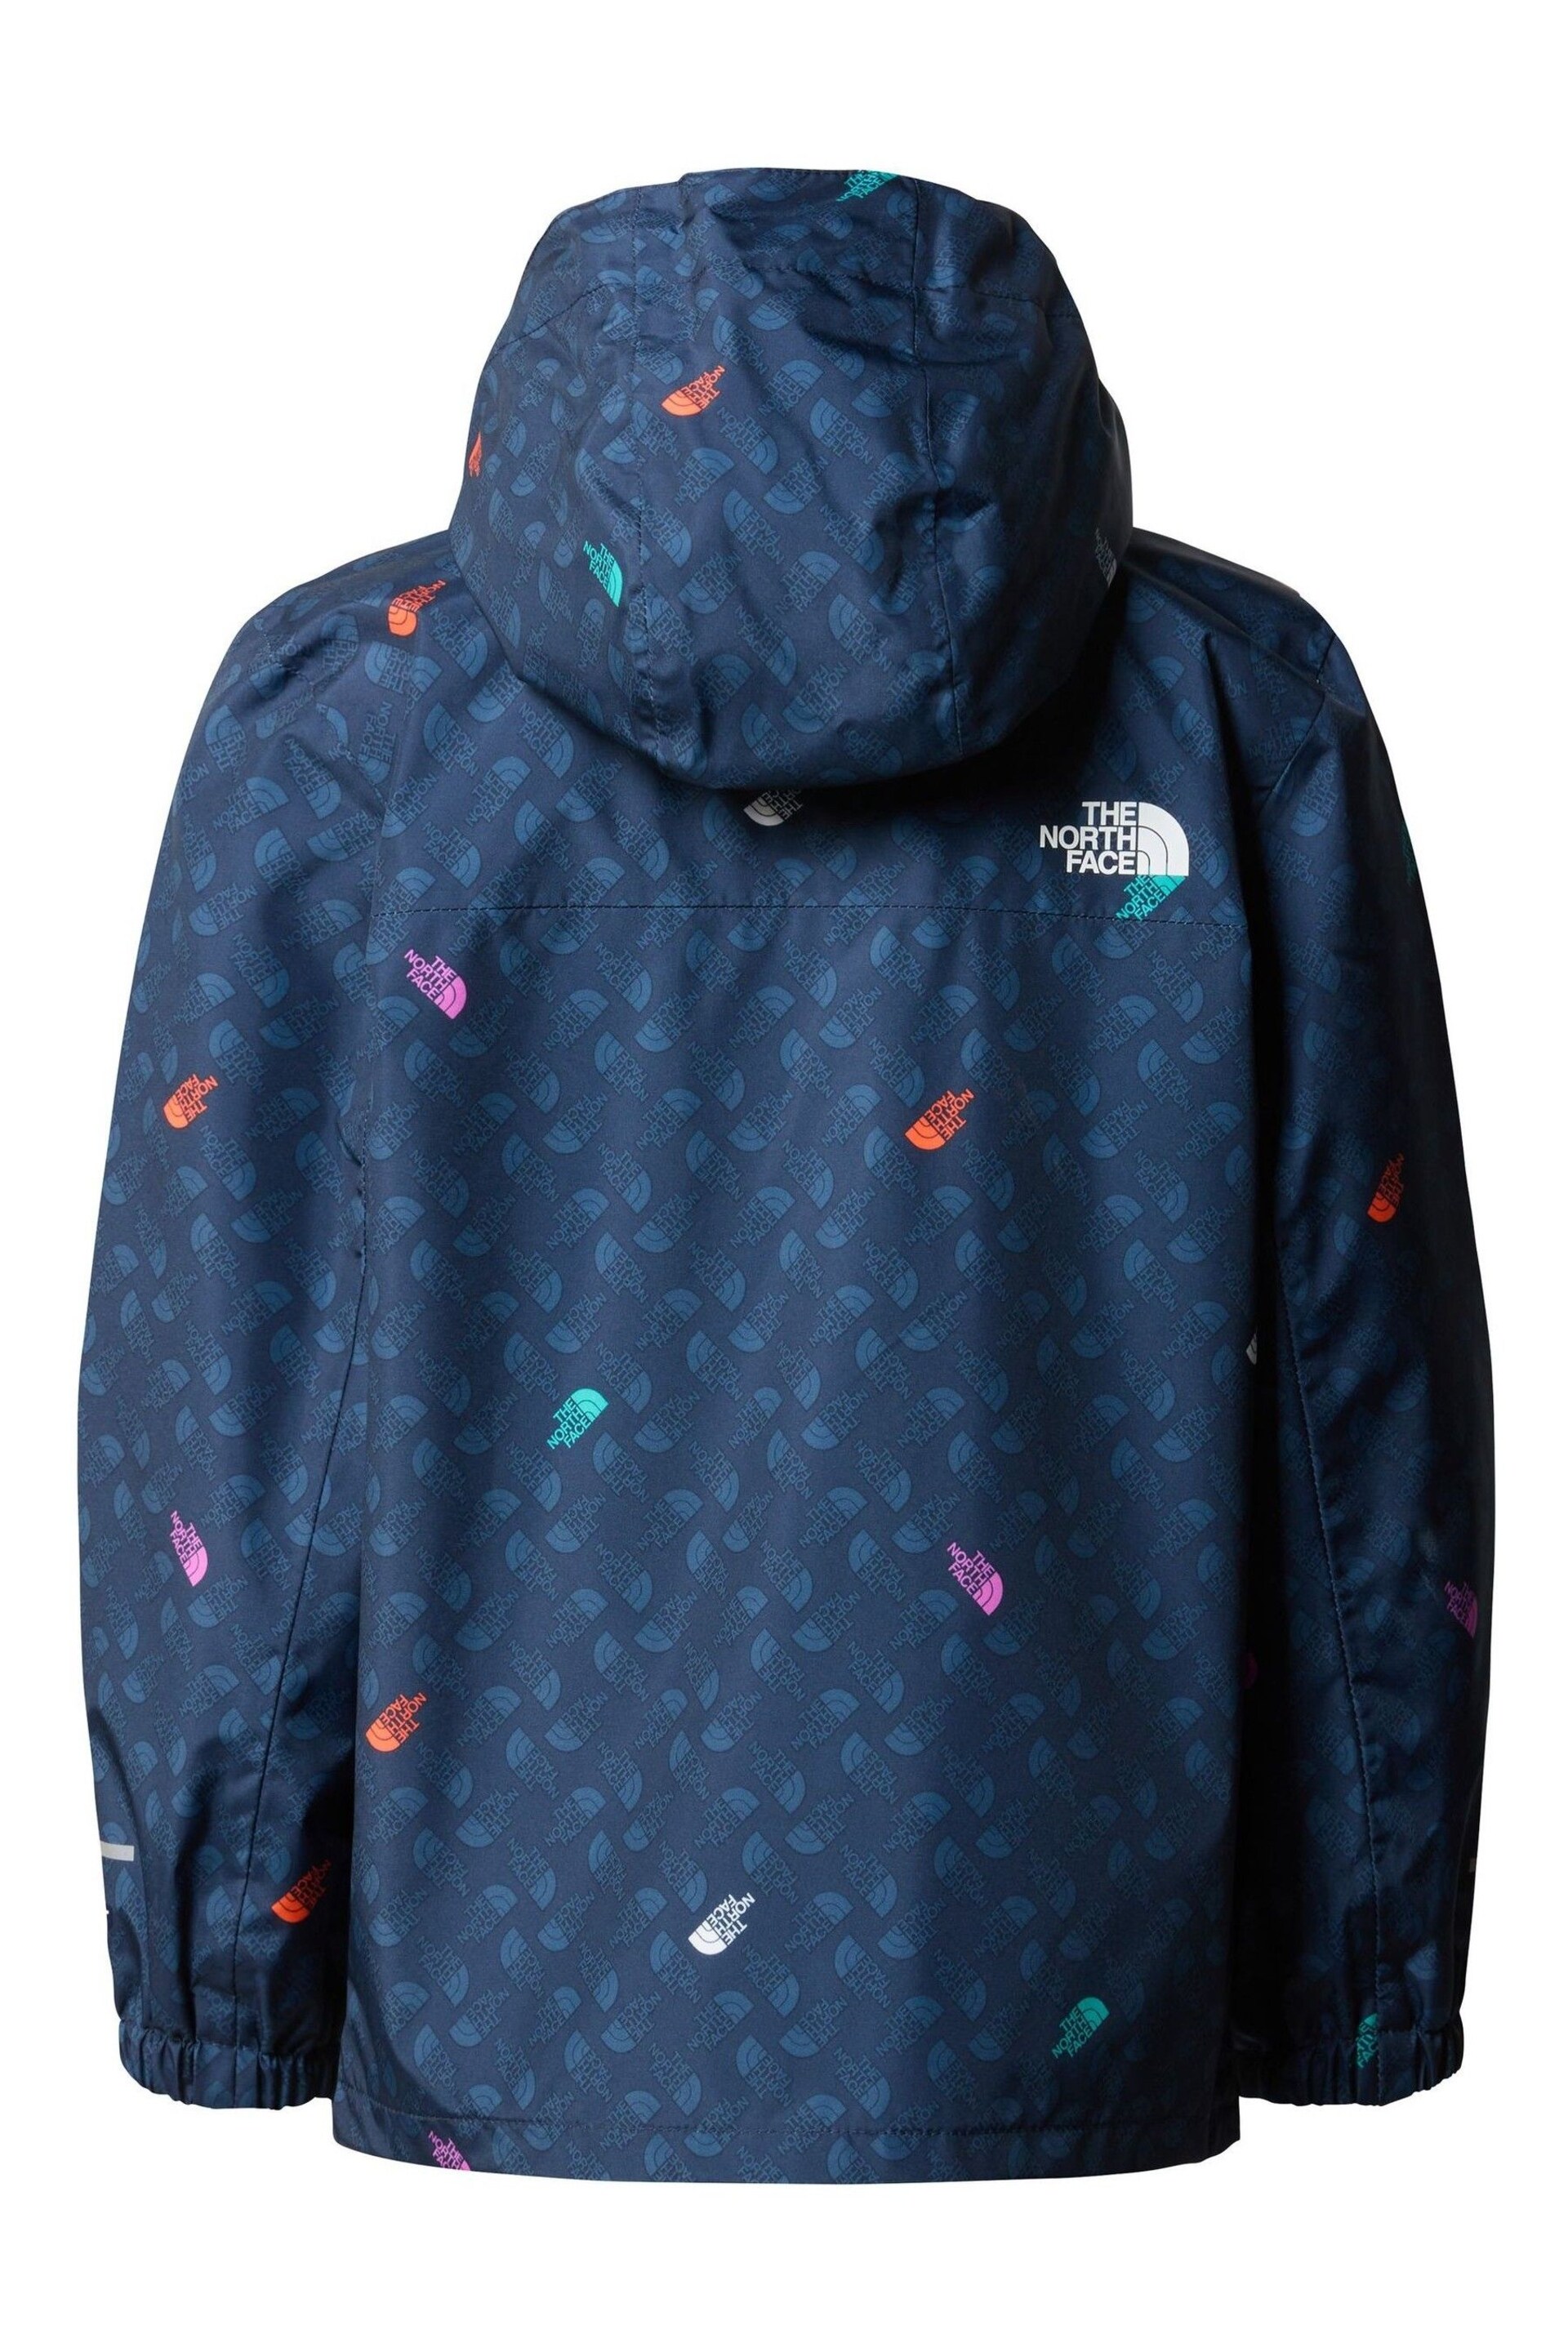 The North Face Blue Kids Antora Jacket - Image 4 of 5